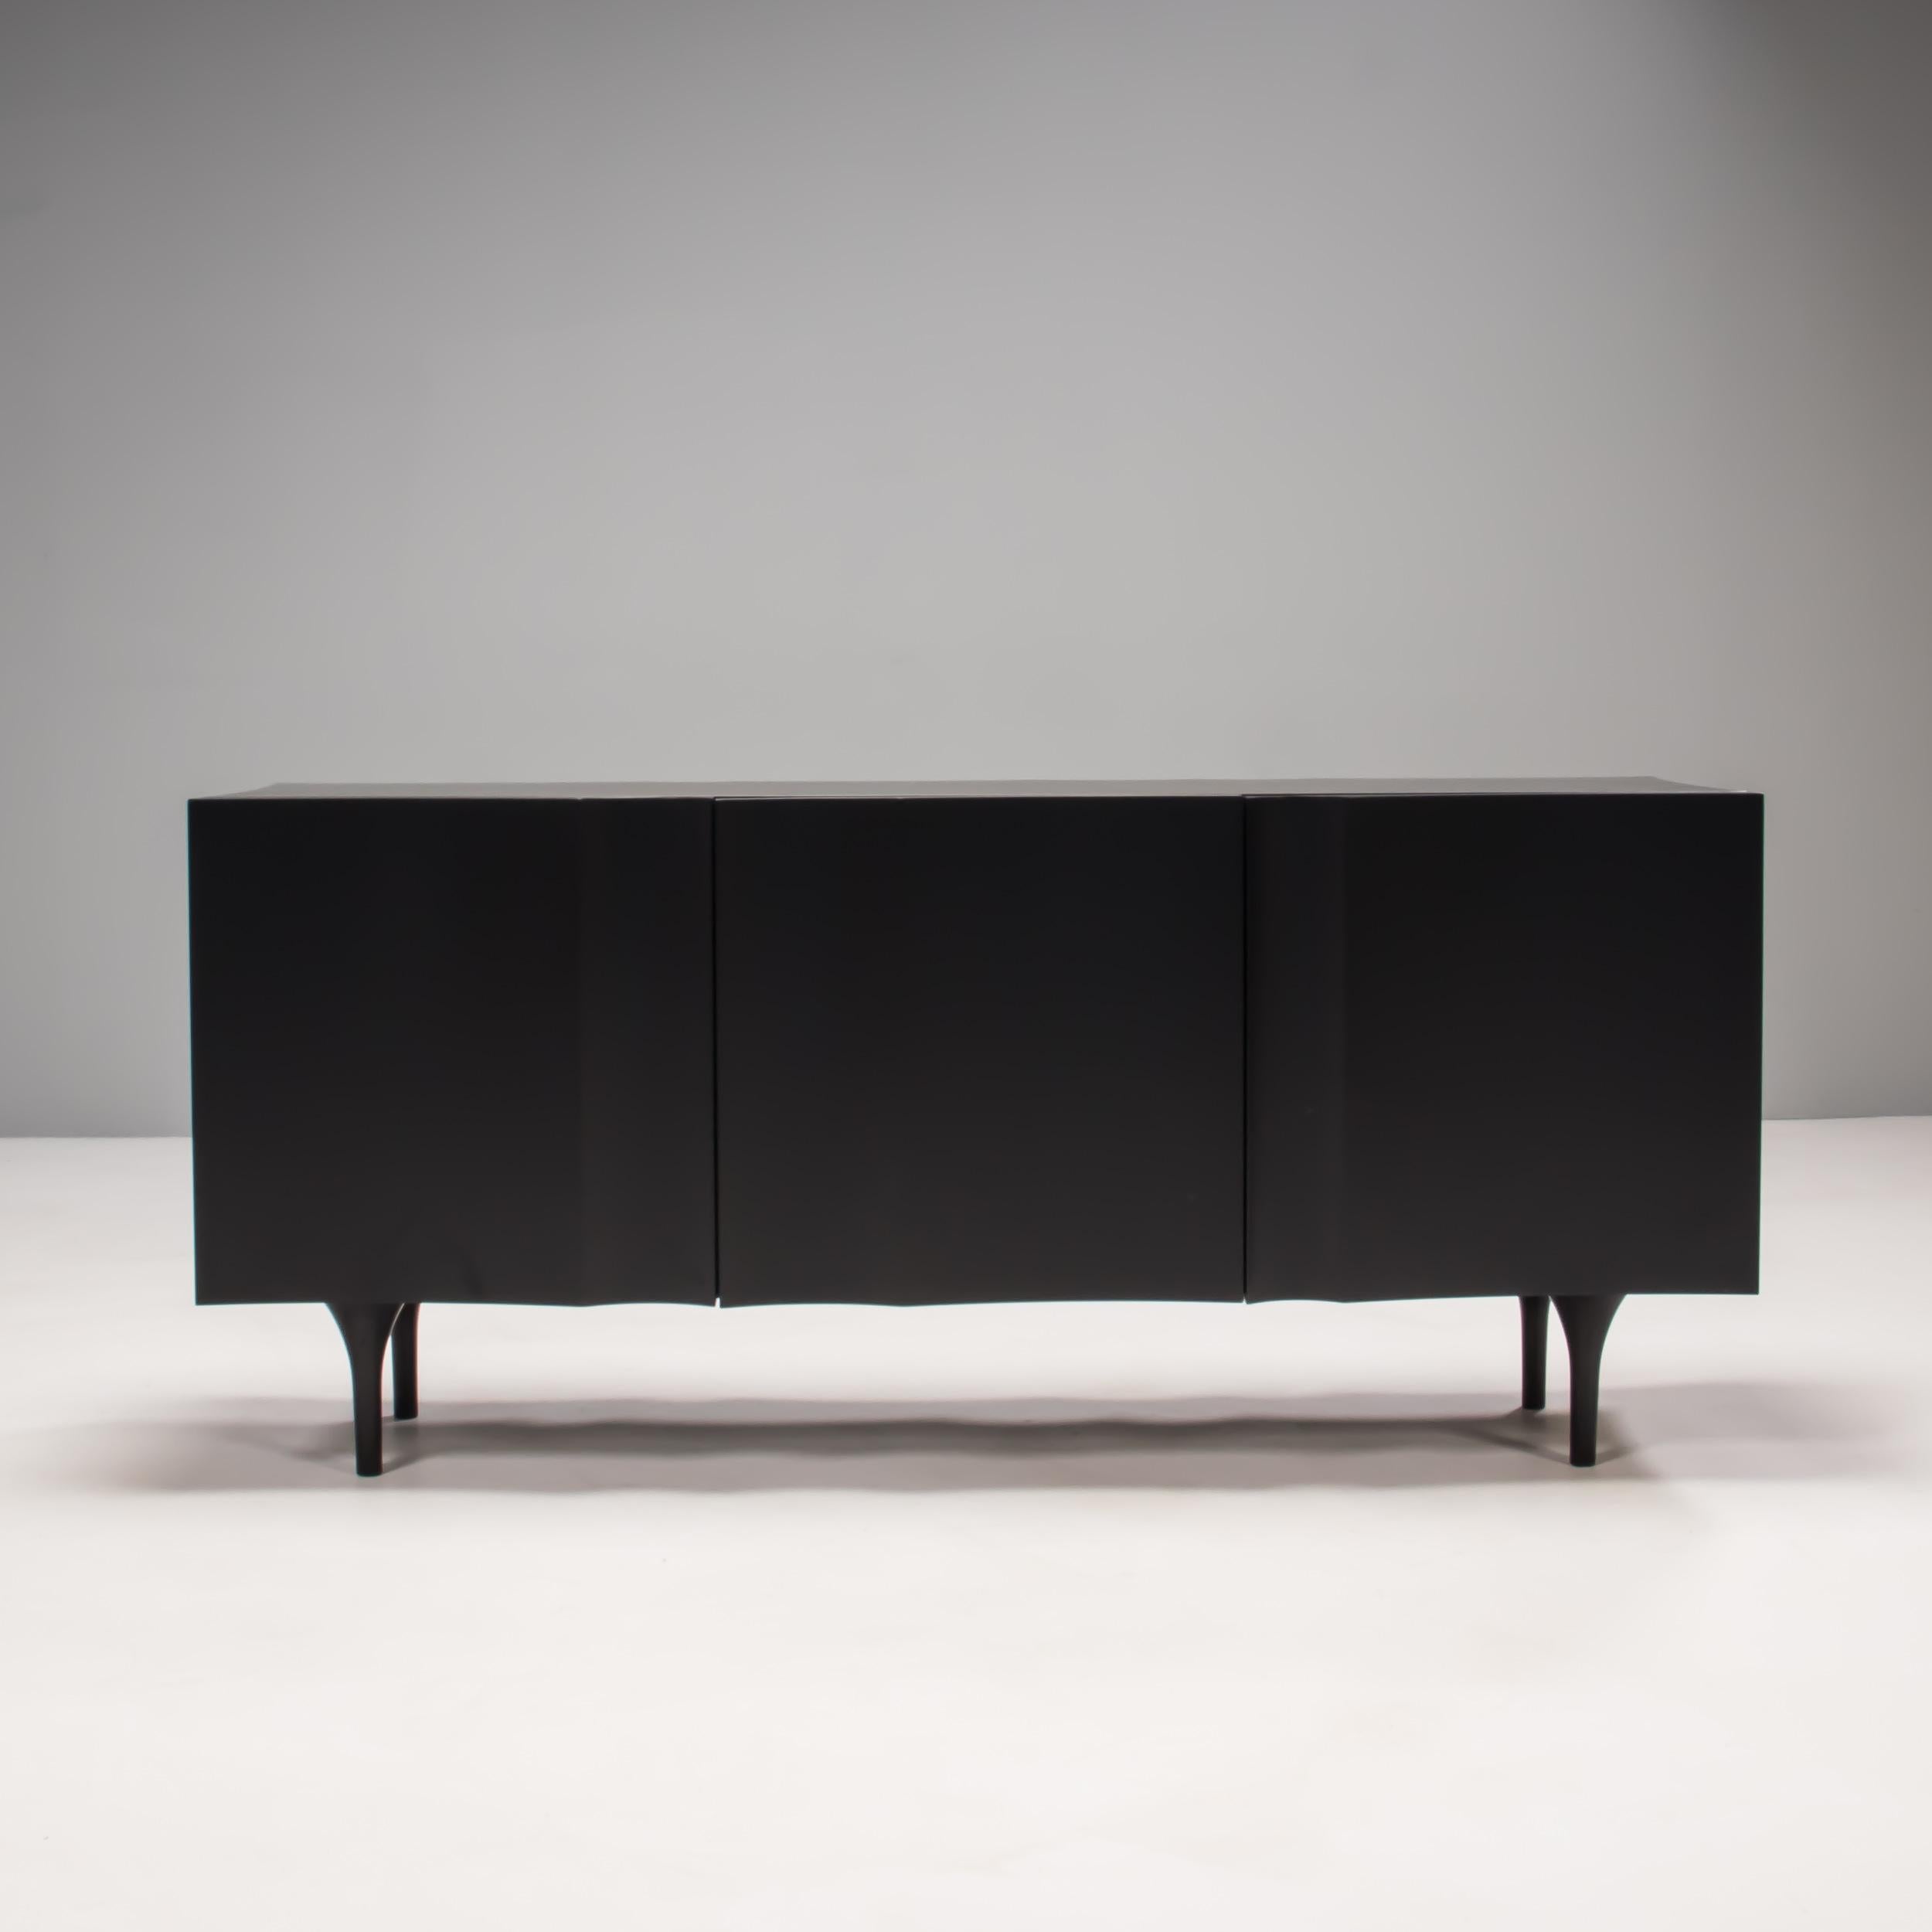 Designed by Damien Langlois-Meurinne for Sé, this commode features a dark and striking silhouette, revealing fine craftsmanship in its wooden frame, lacquered interior and exquisitely-tapered legs.

The fold motif on its silky surface evokes ones